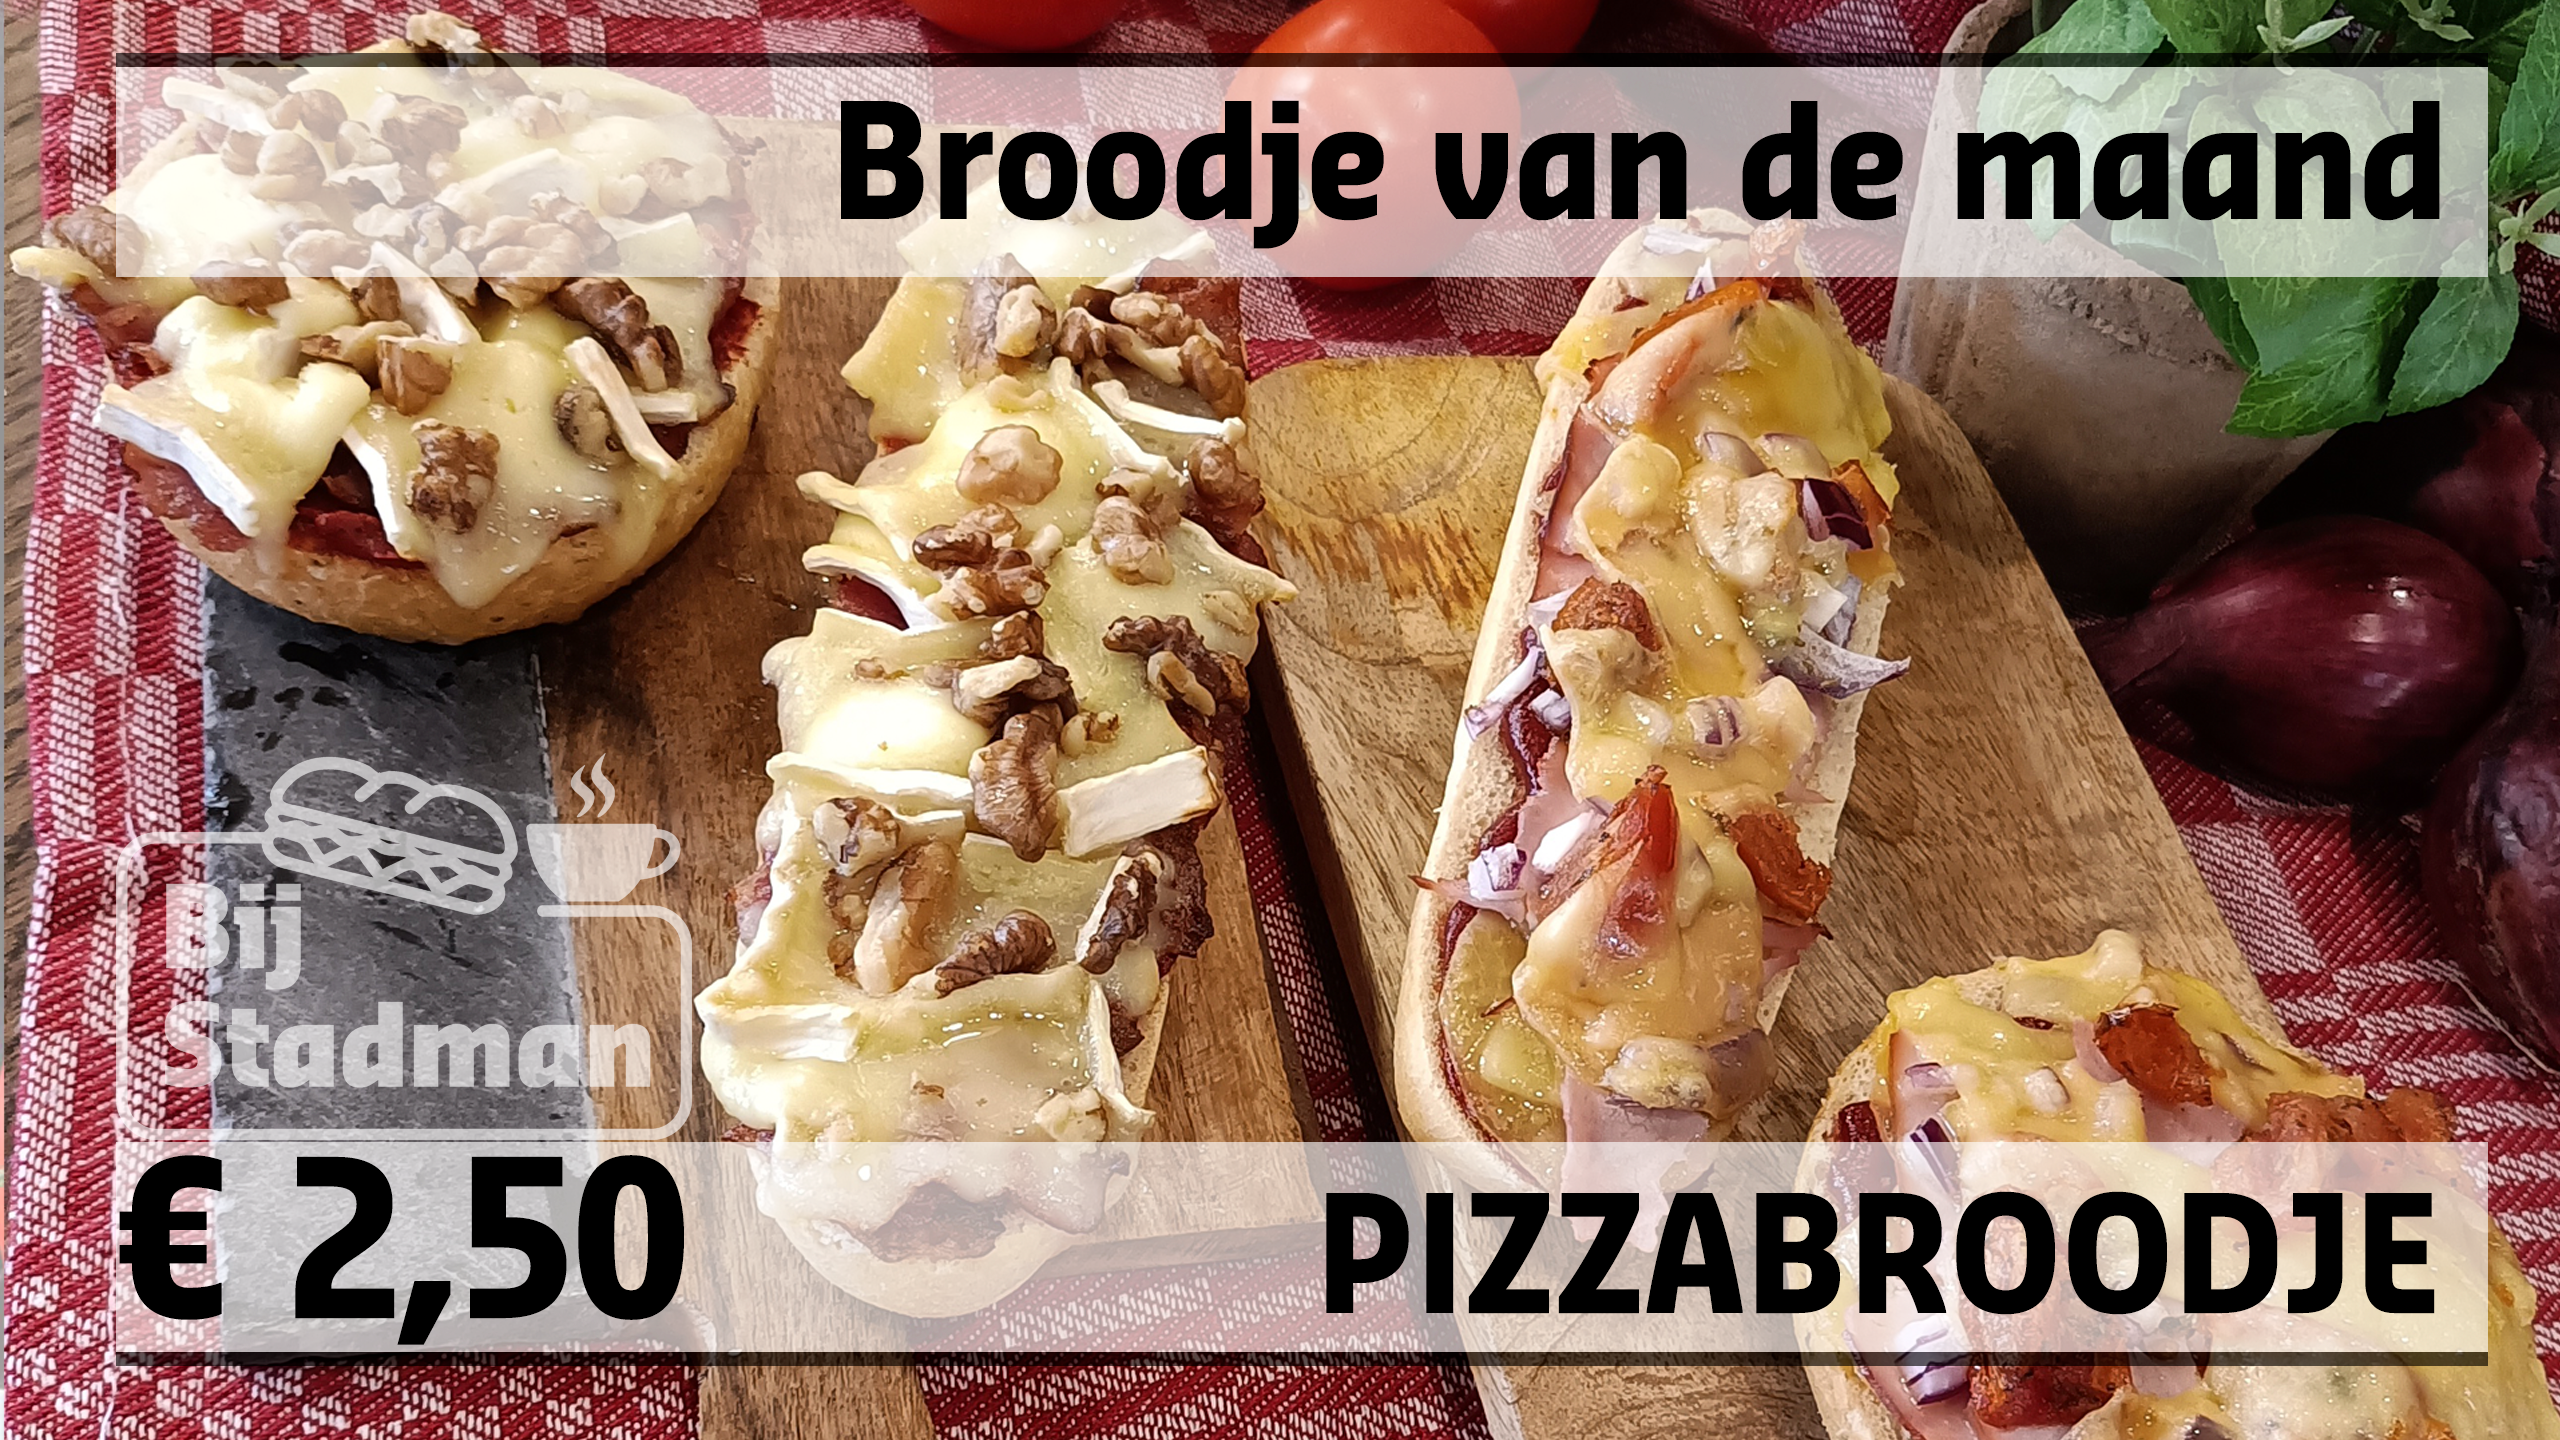 Pizzabroodje